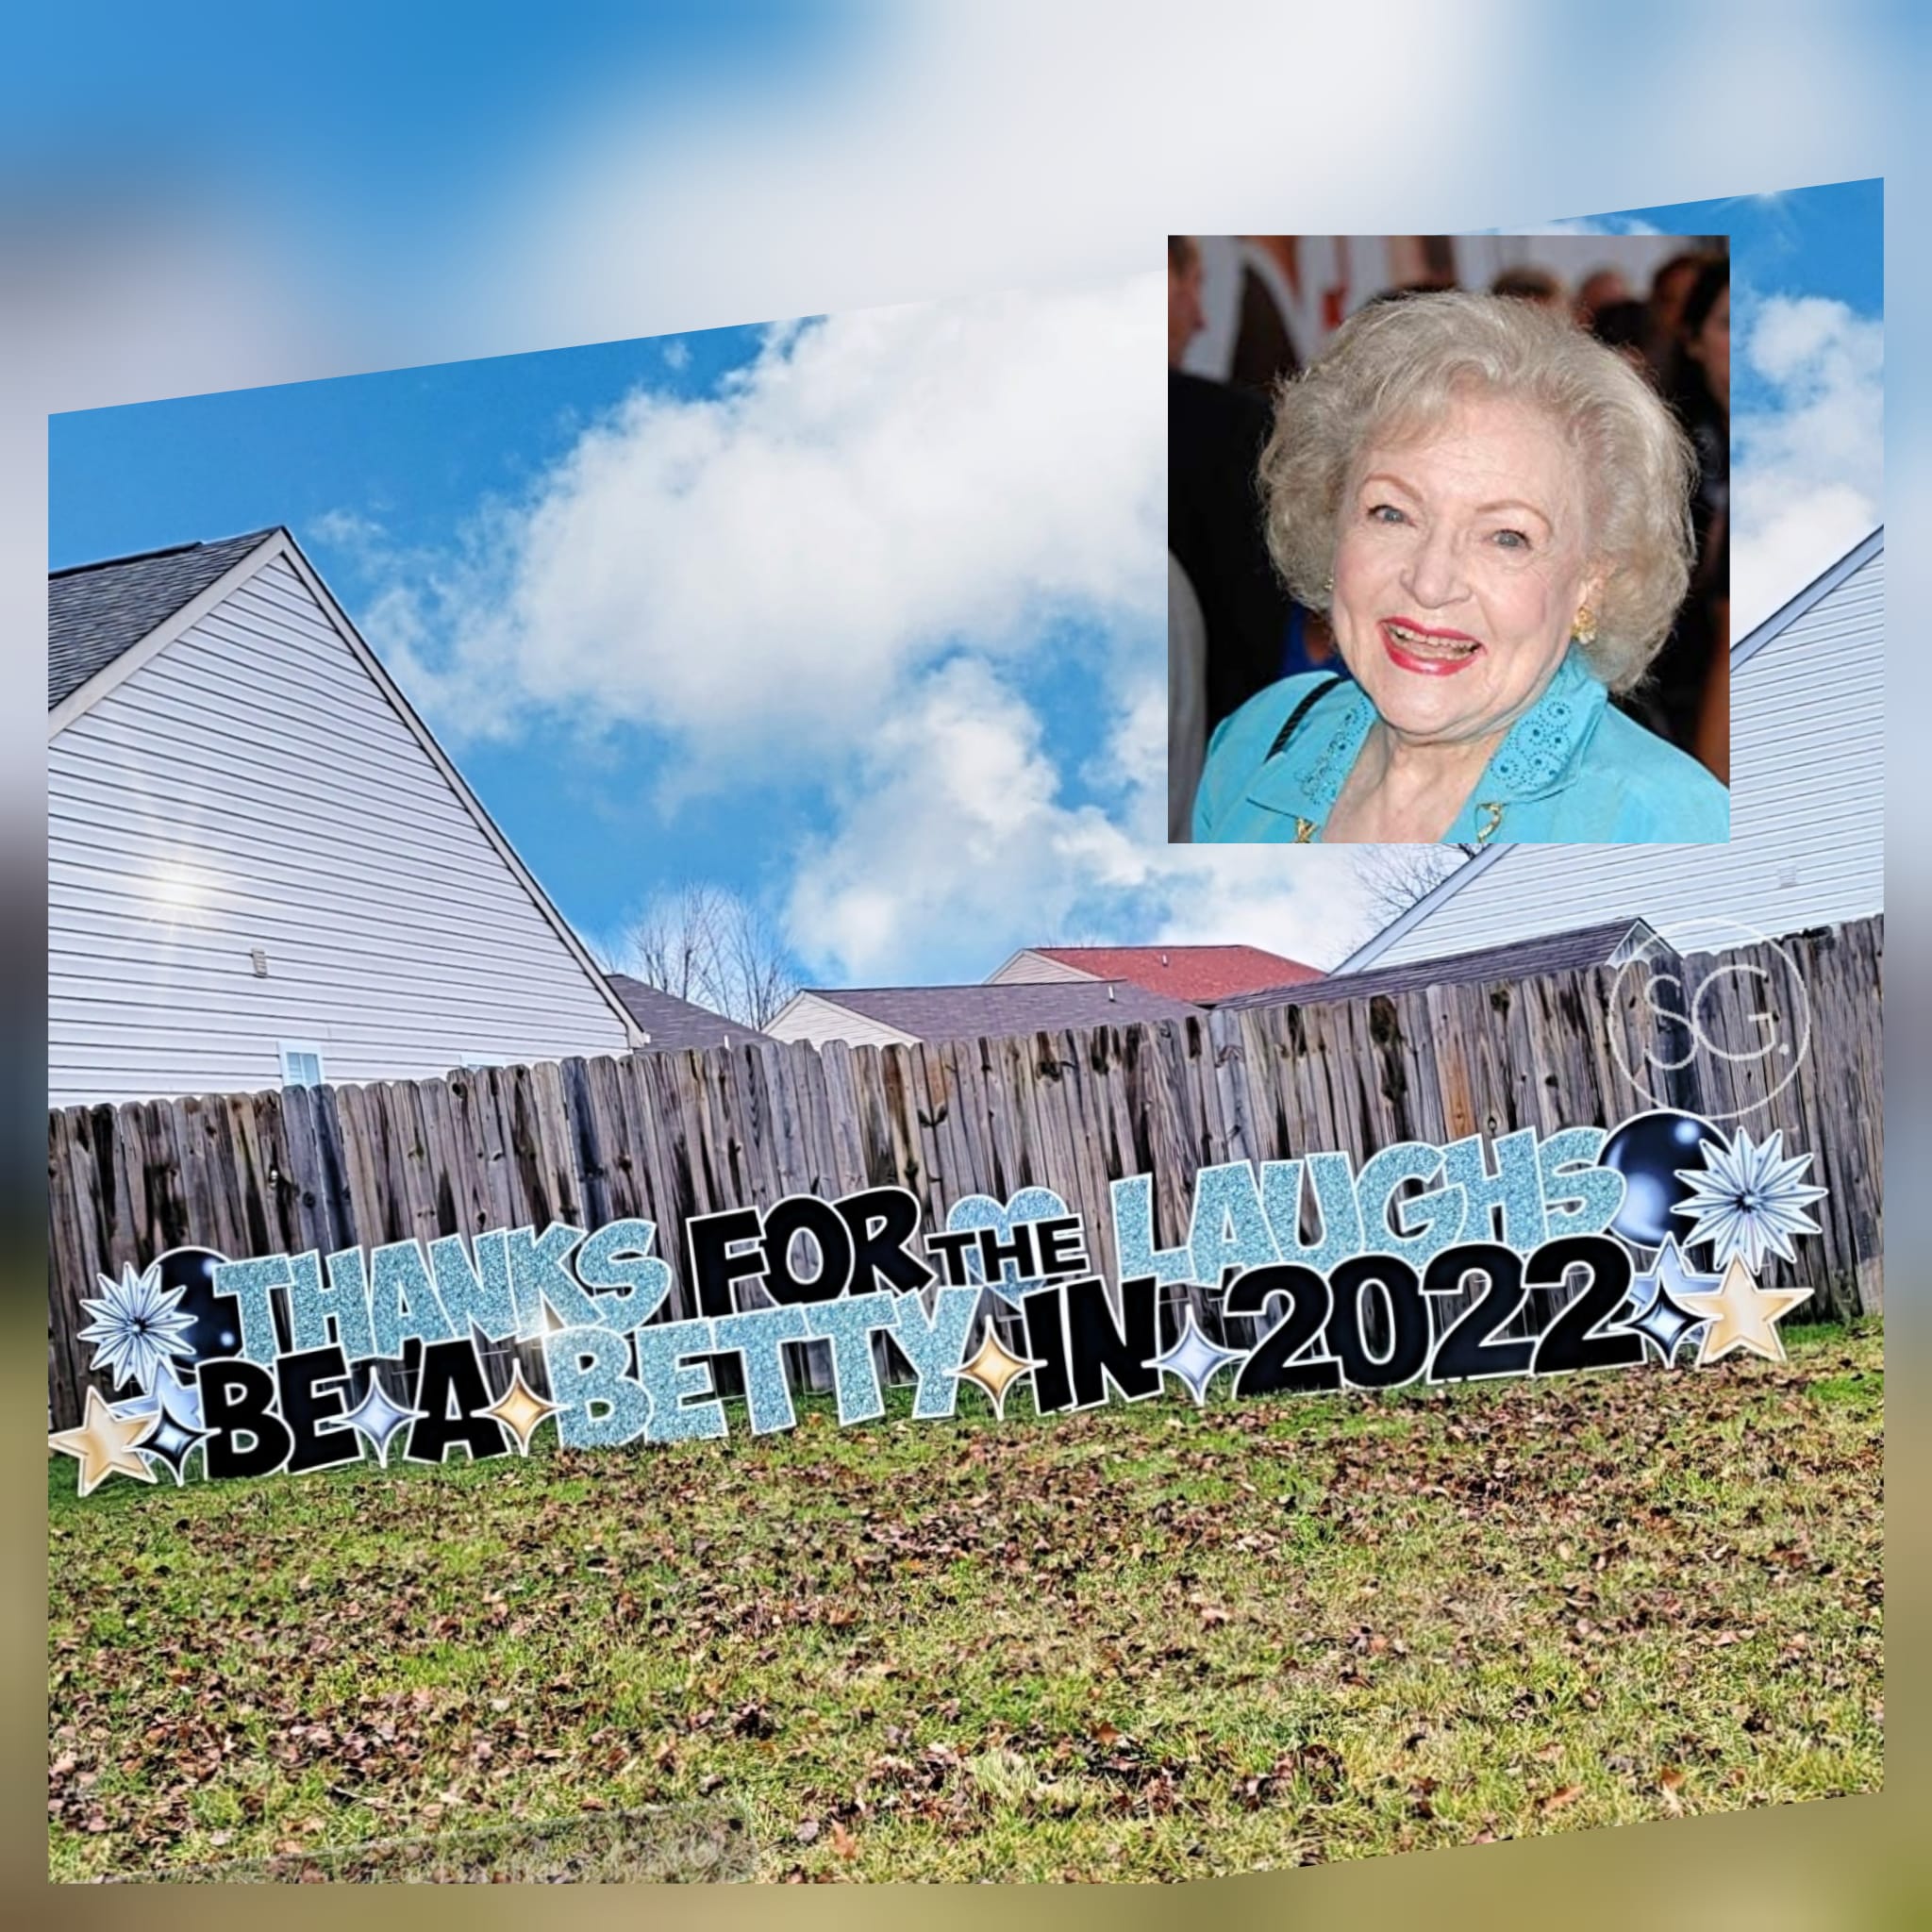 Bay City, MI: Sign Gypsies to pay tribute to iconic actress, comedian Betty White